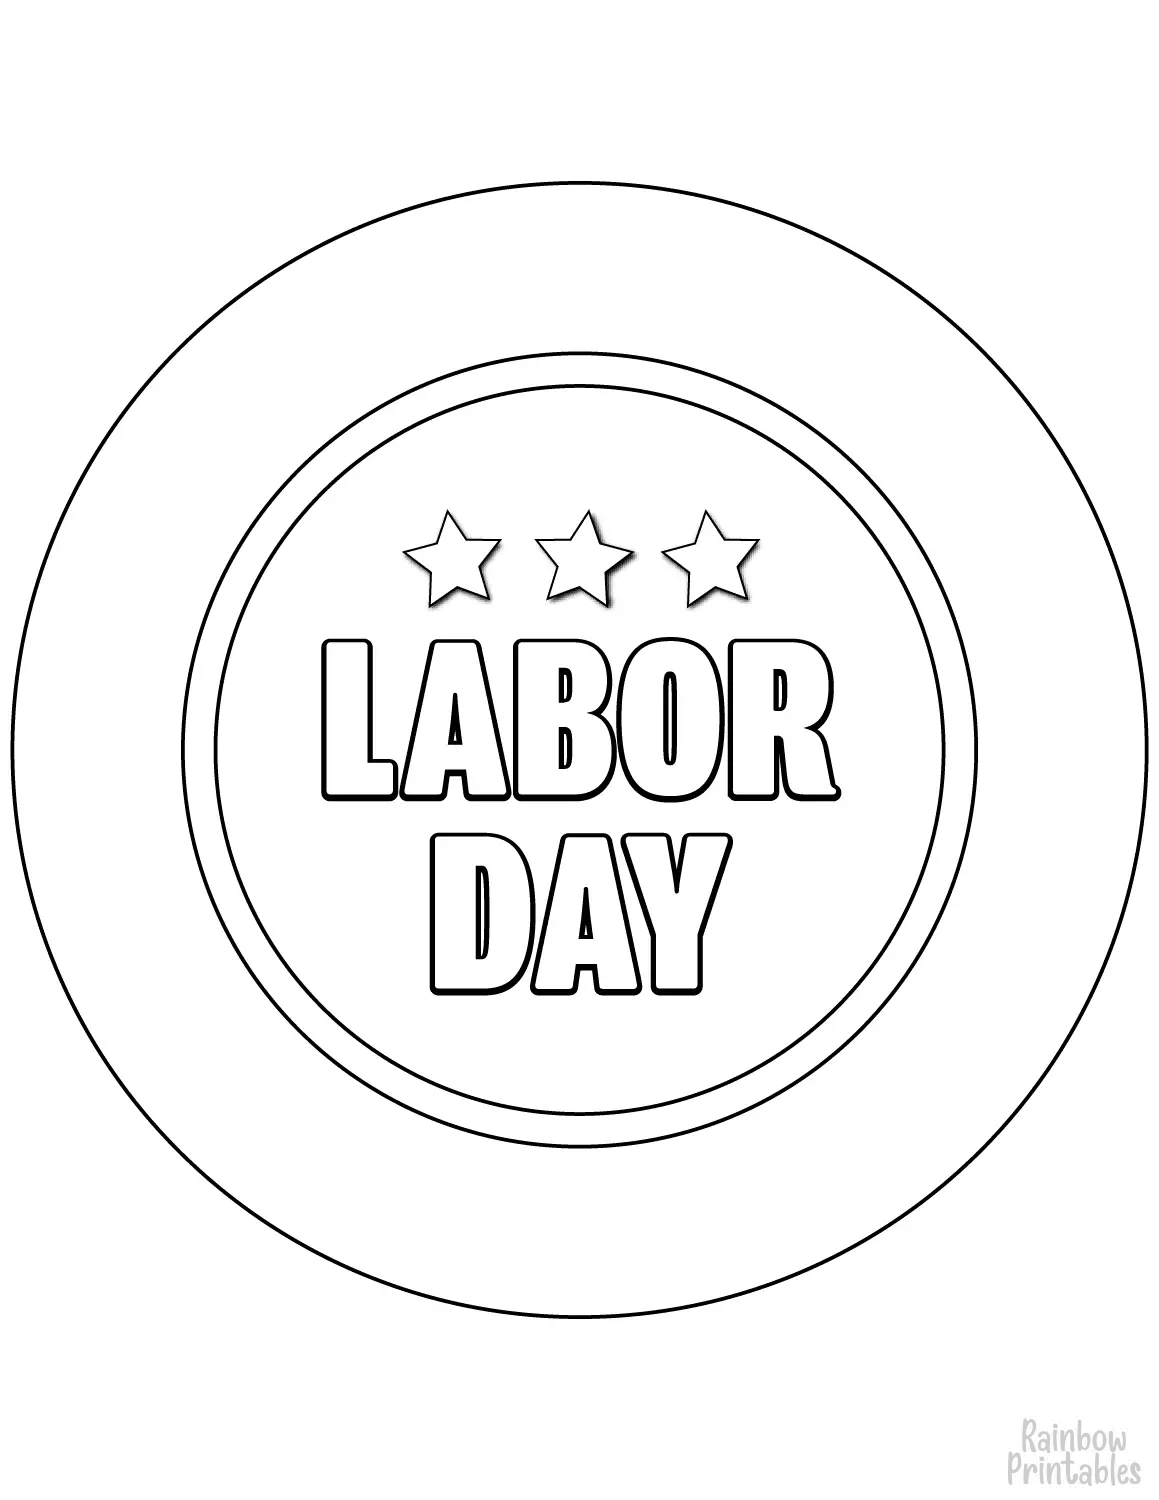 Roundel USA HOLIDAY LABOR DAY Clipart Coloring Pages Line Art Drawings for Kids-